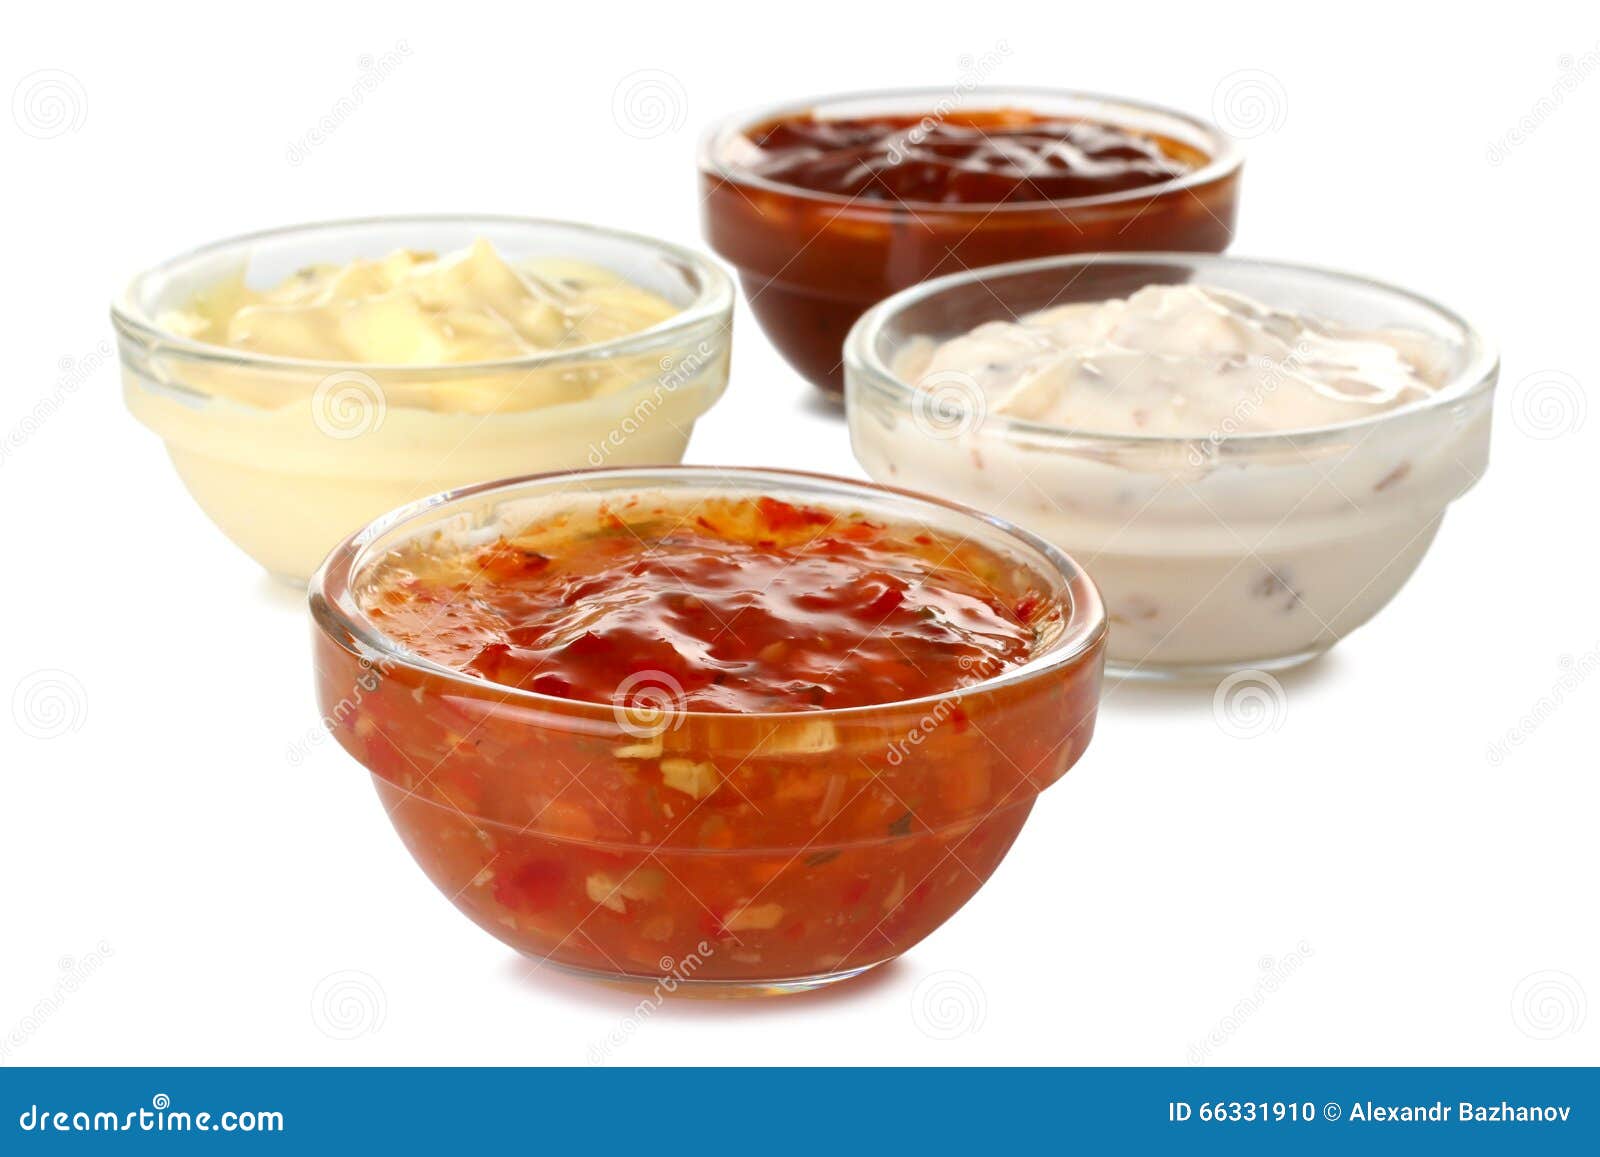 assorted sauces